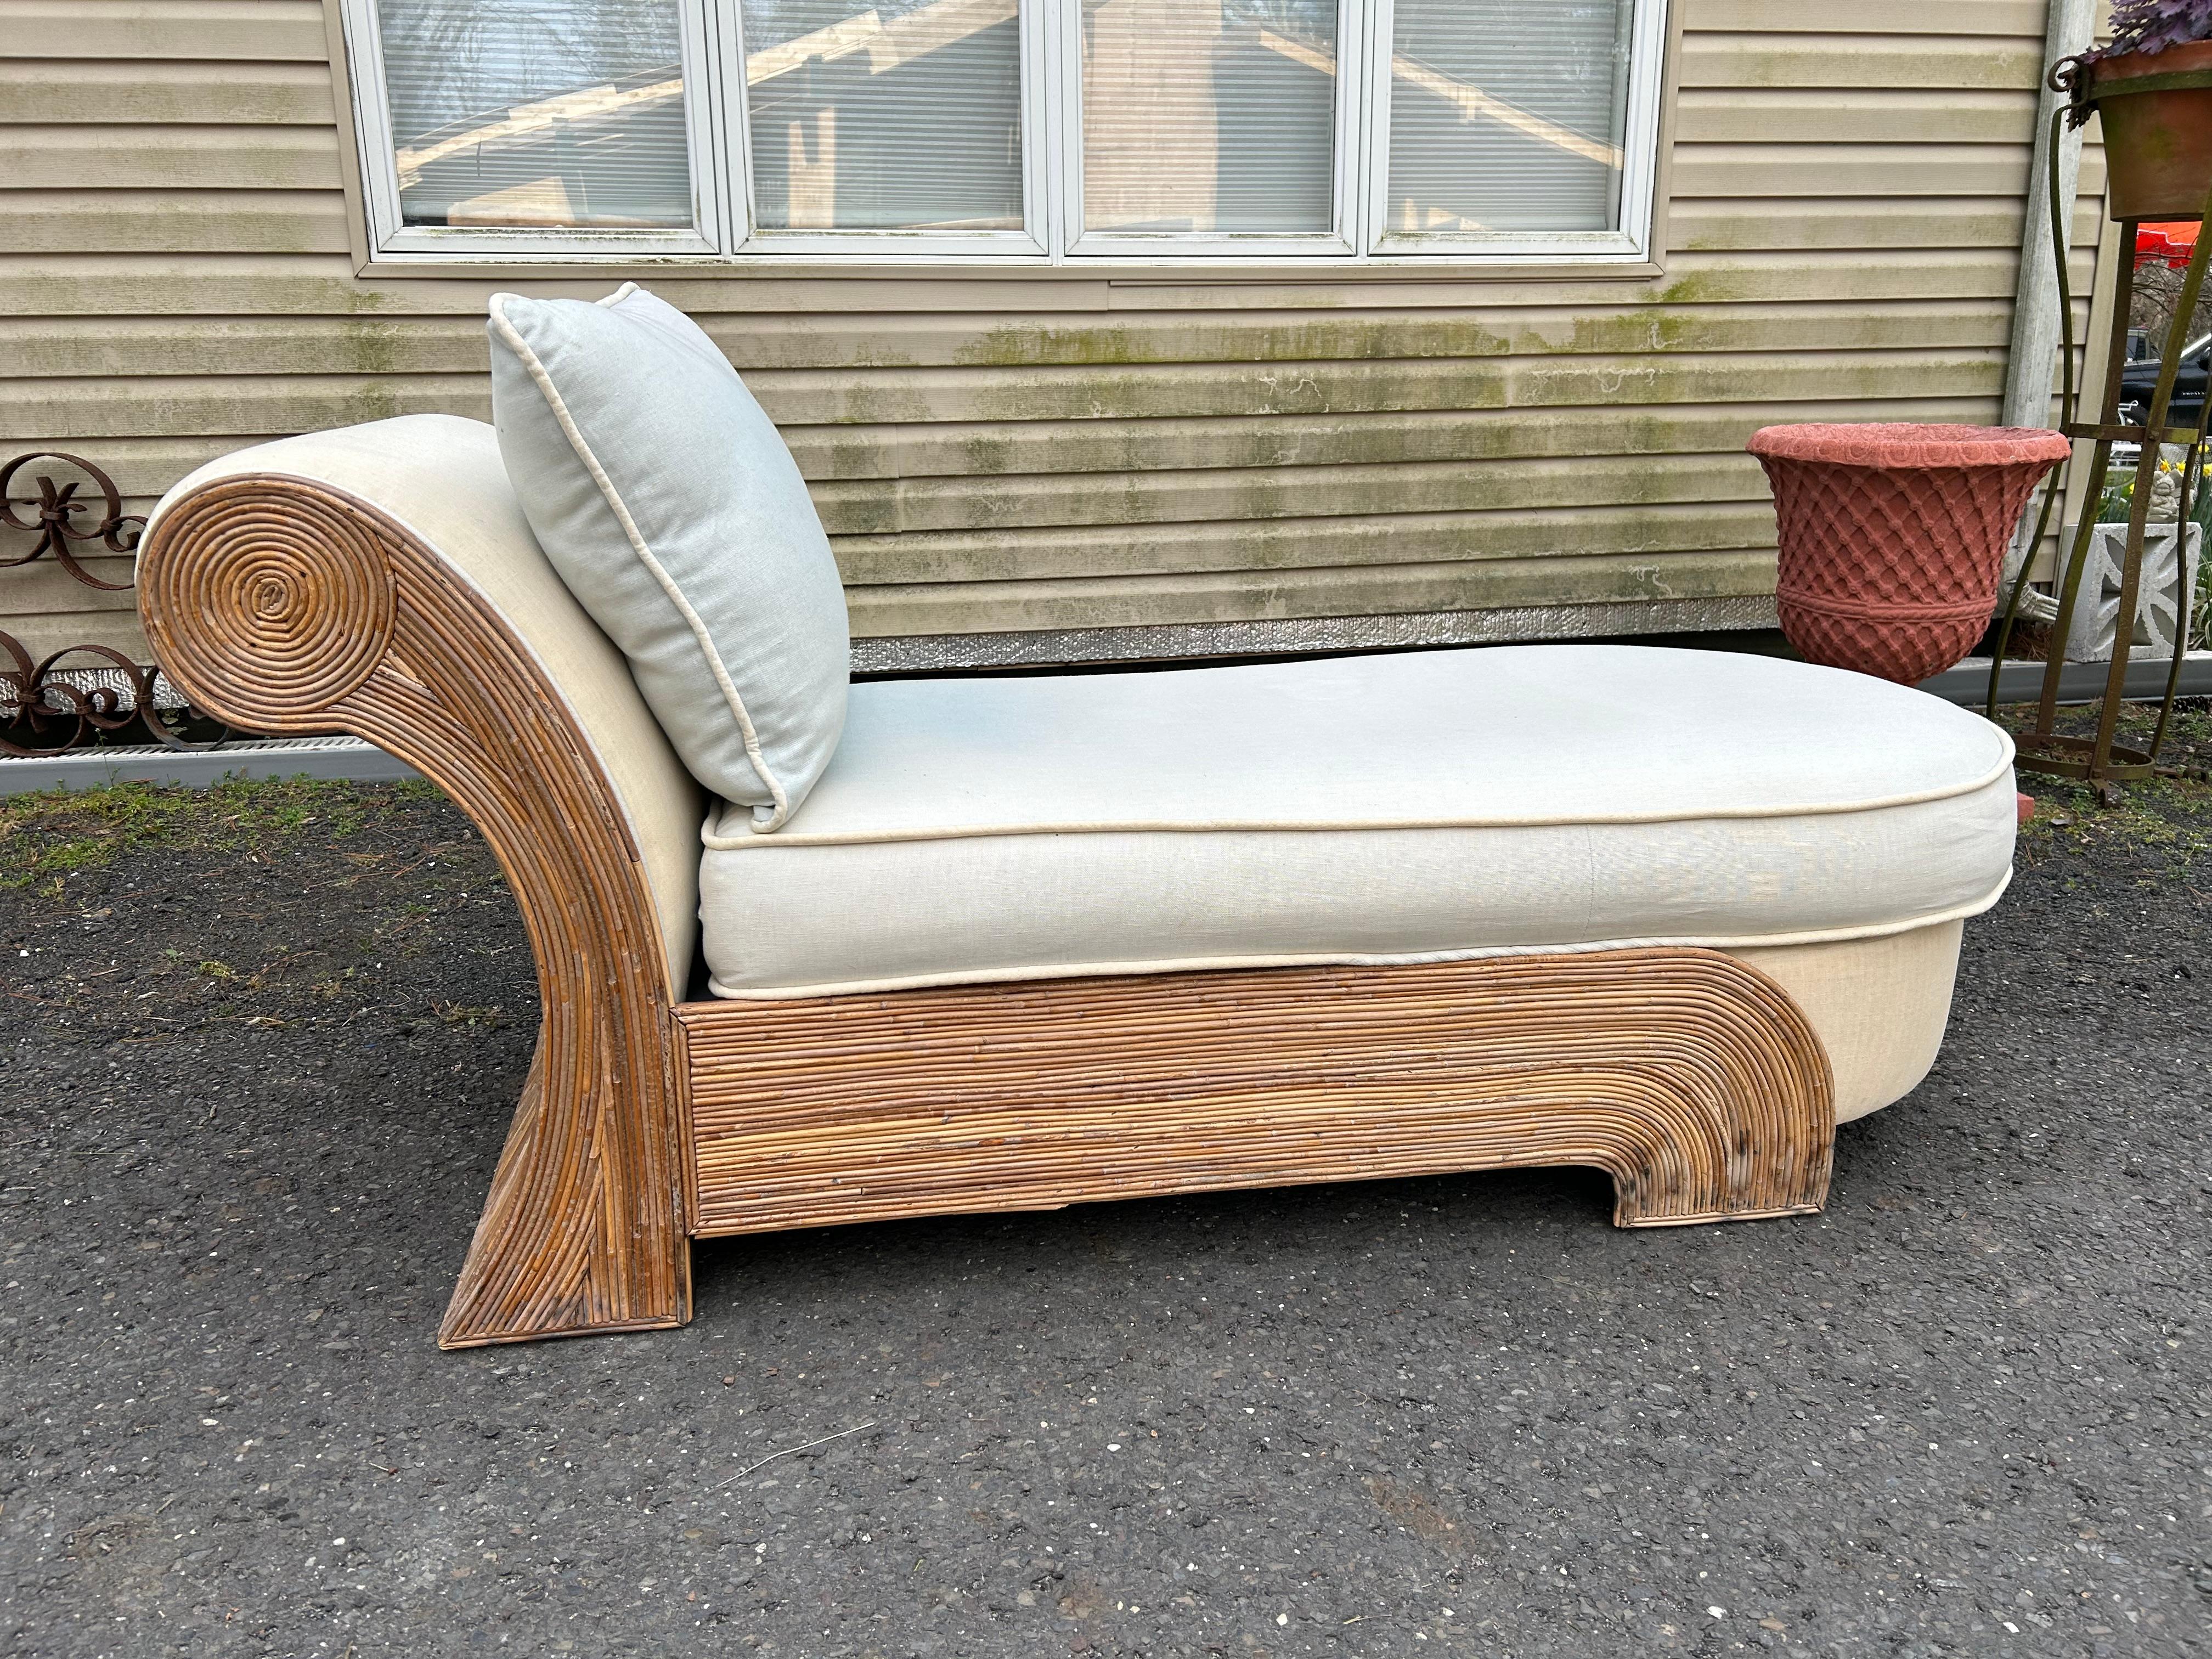 A fantastic vintage Coastal chaise lounge made by the iconic Comfort Designs. A chic pencil reed frame in a fab scroll design and upholstered in a light blue linen.  This piece measures 28't x 67